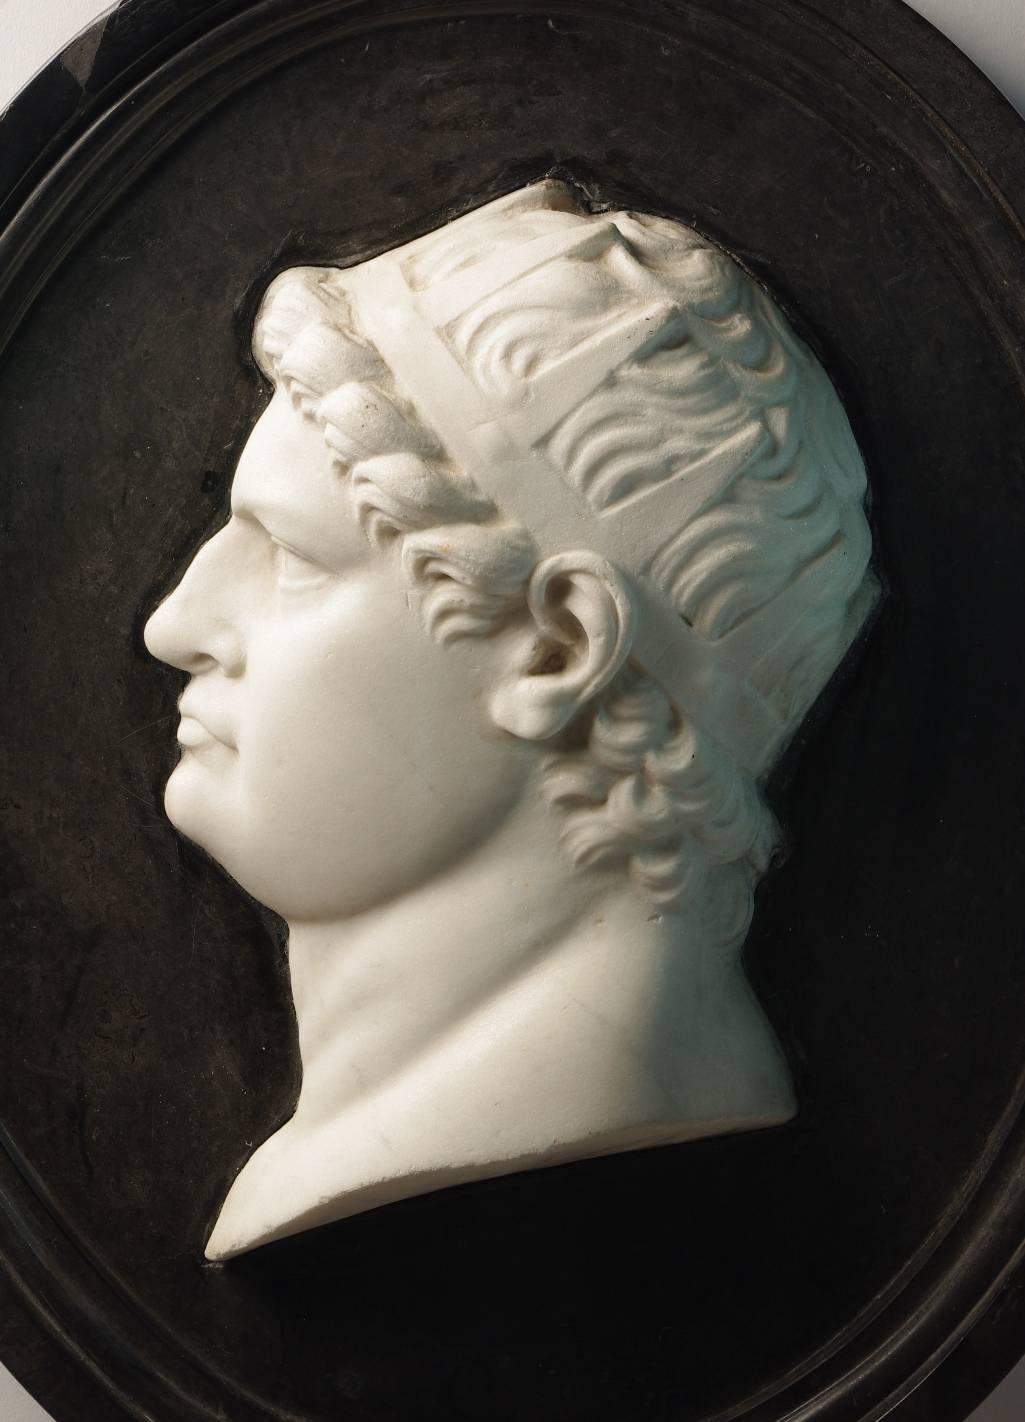 Grand Tour marble plaque of Nero in profile wearing a crown, carved in white marble and set within a black marble oval plaque.

The corpulent figure depicted in this plaque is almost certainly Nero. Infamous for his debaucheries and political